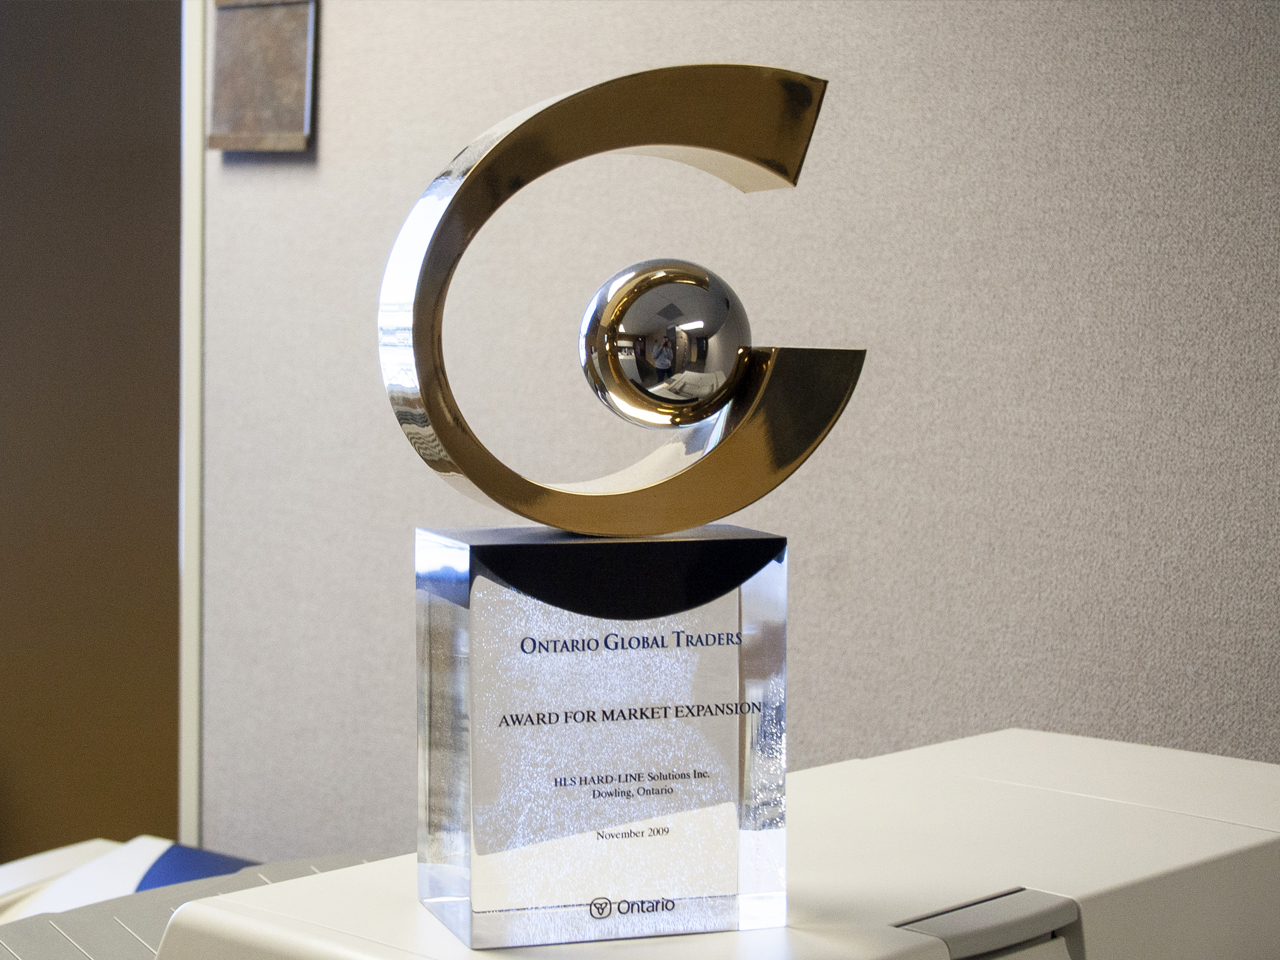 Ontario Global Traders Award for Market Expansion